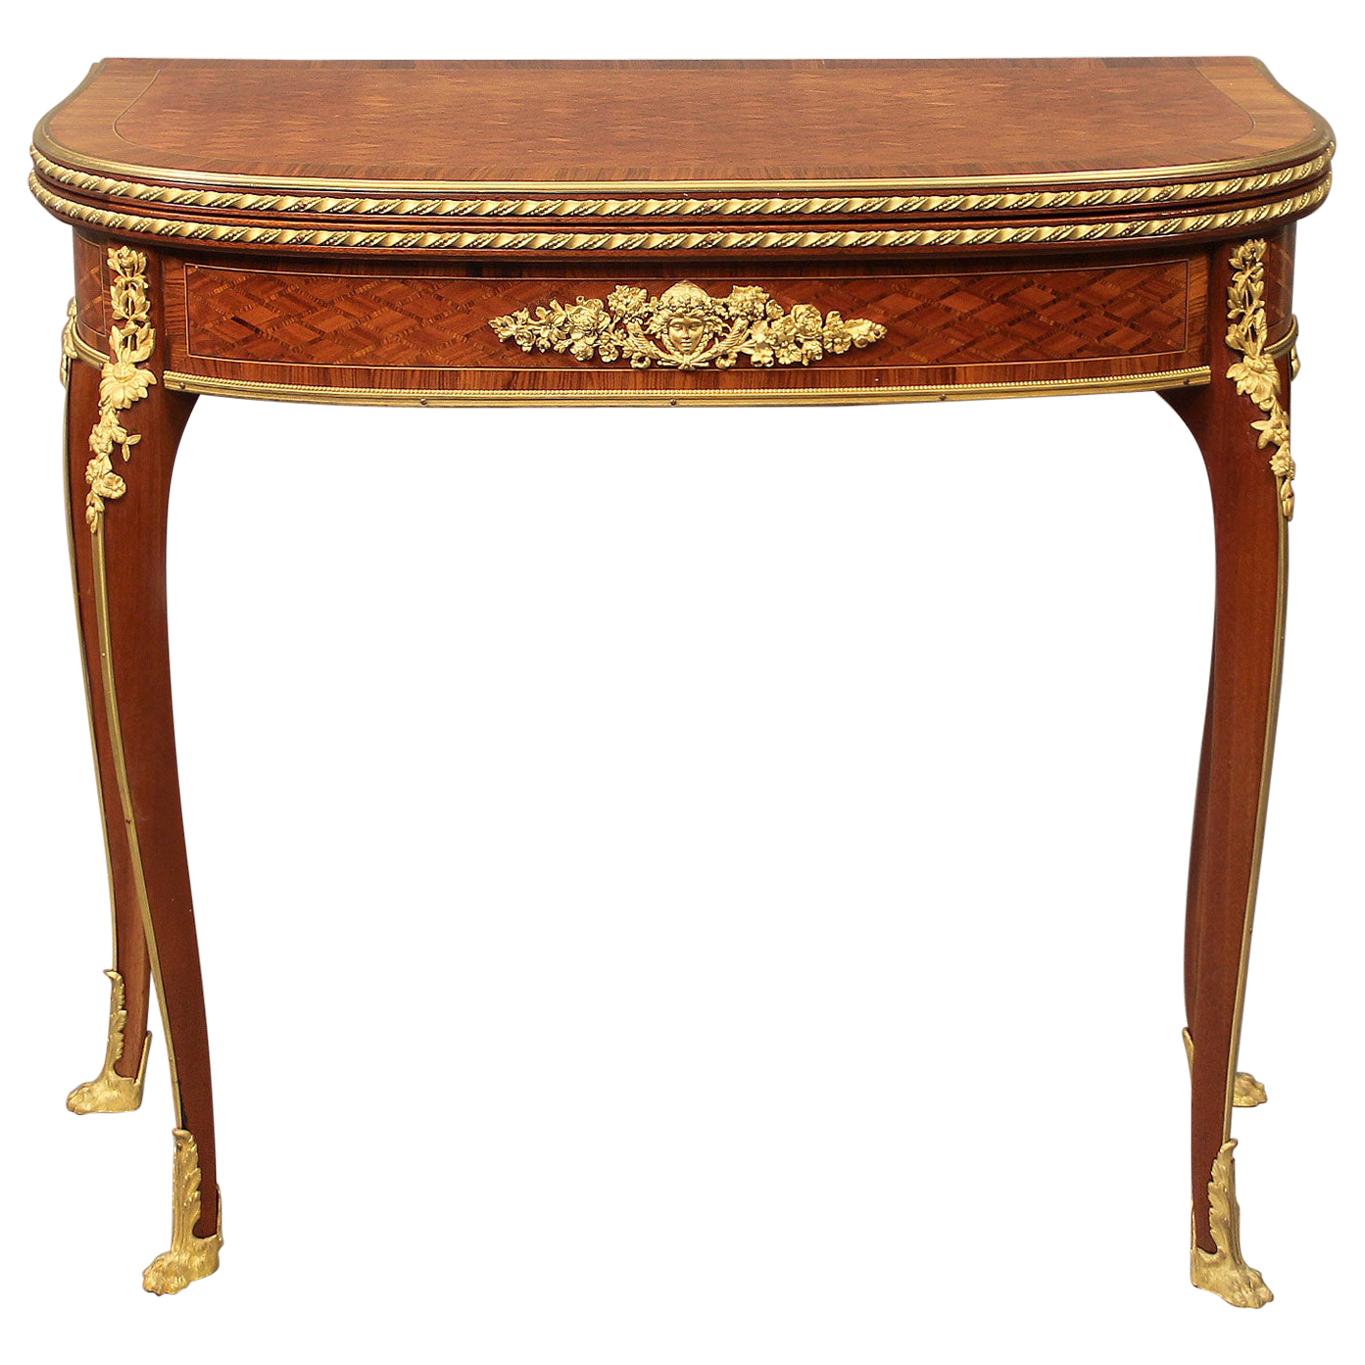 Late 19th Century Louis XV Style Gilt Bronze Mounted Card Table, François Linke